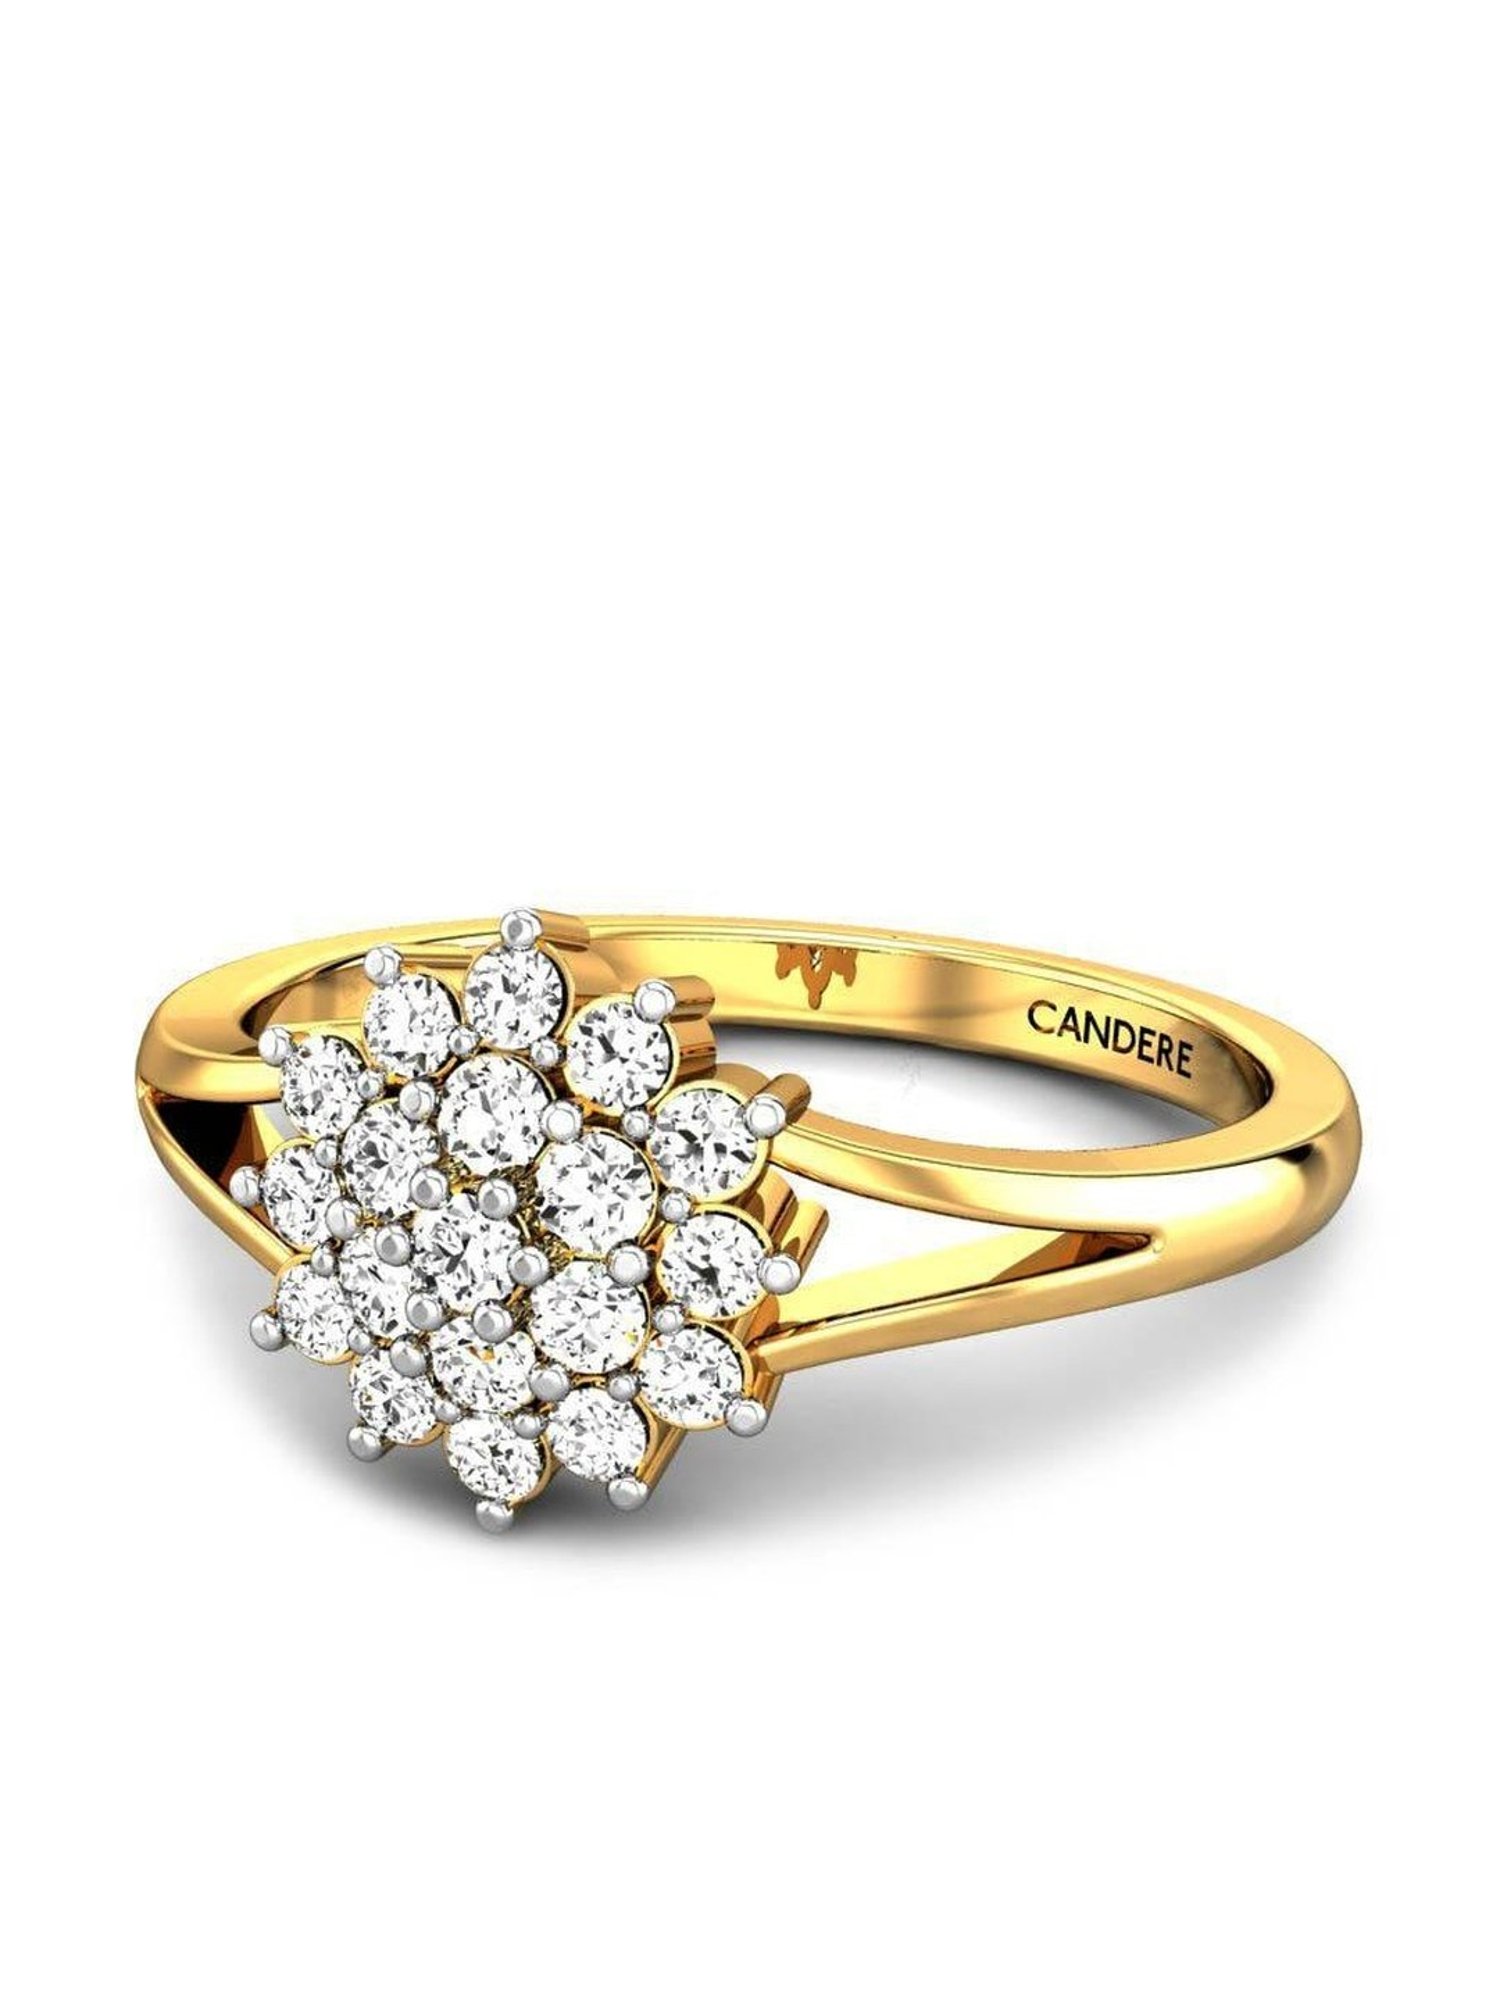 Paravi Gold Ring Online Jewellery Shopping India | Yellow Gold 14K | Candere  by Kalyan Jewellers